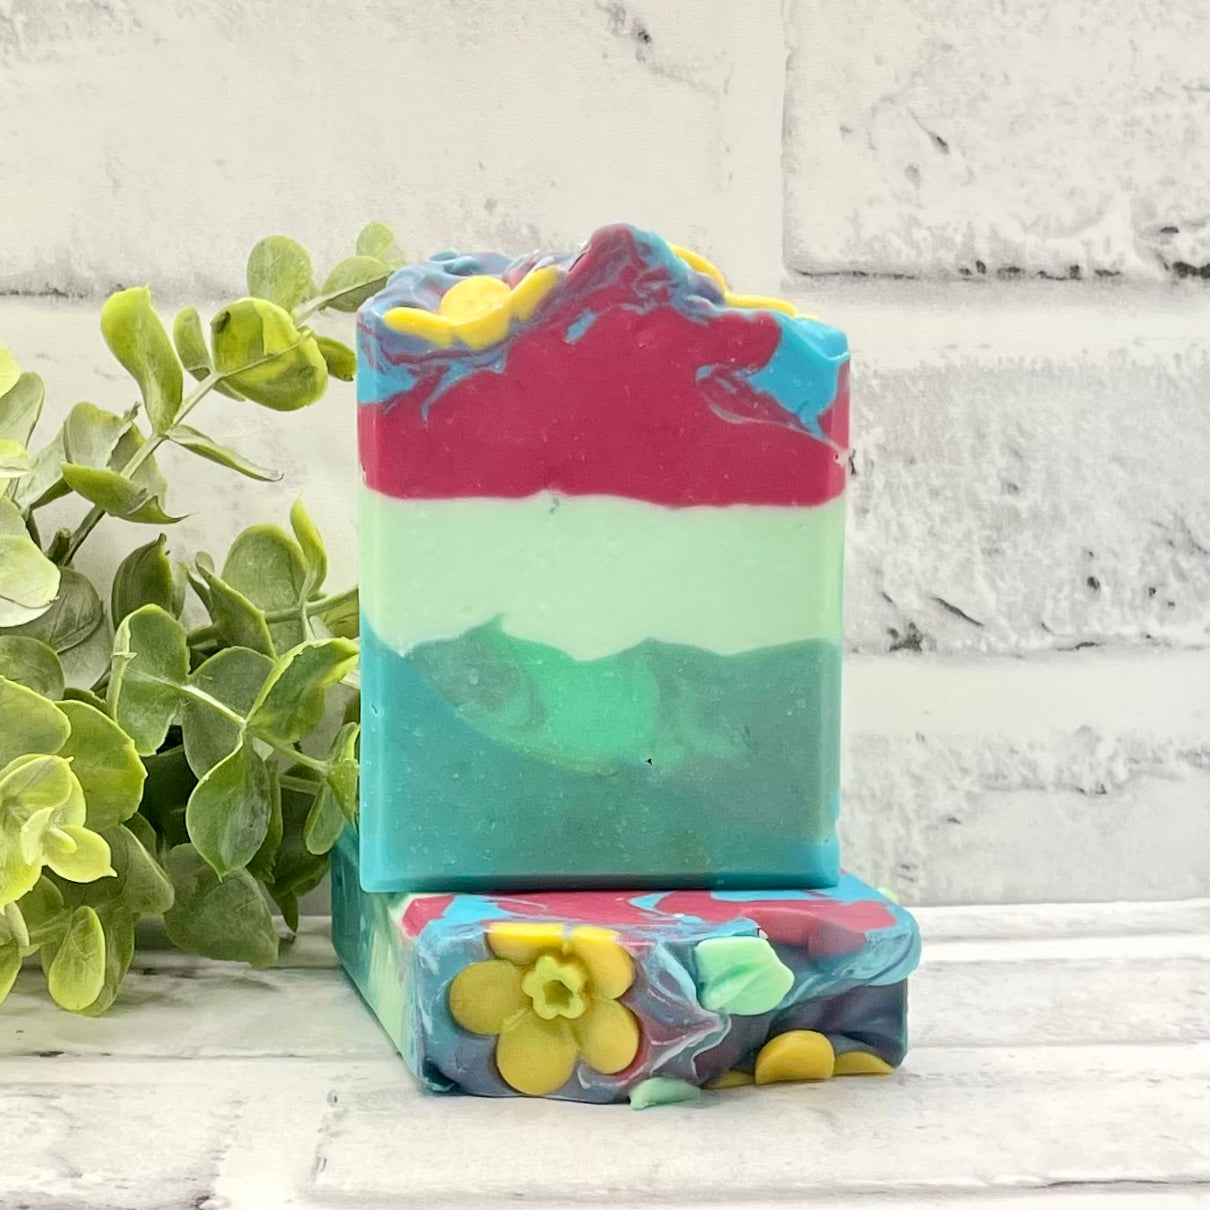 Vegan soap with watermelon colored layers